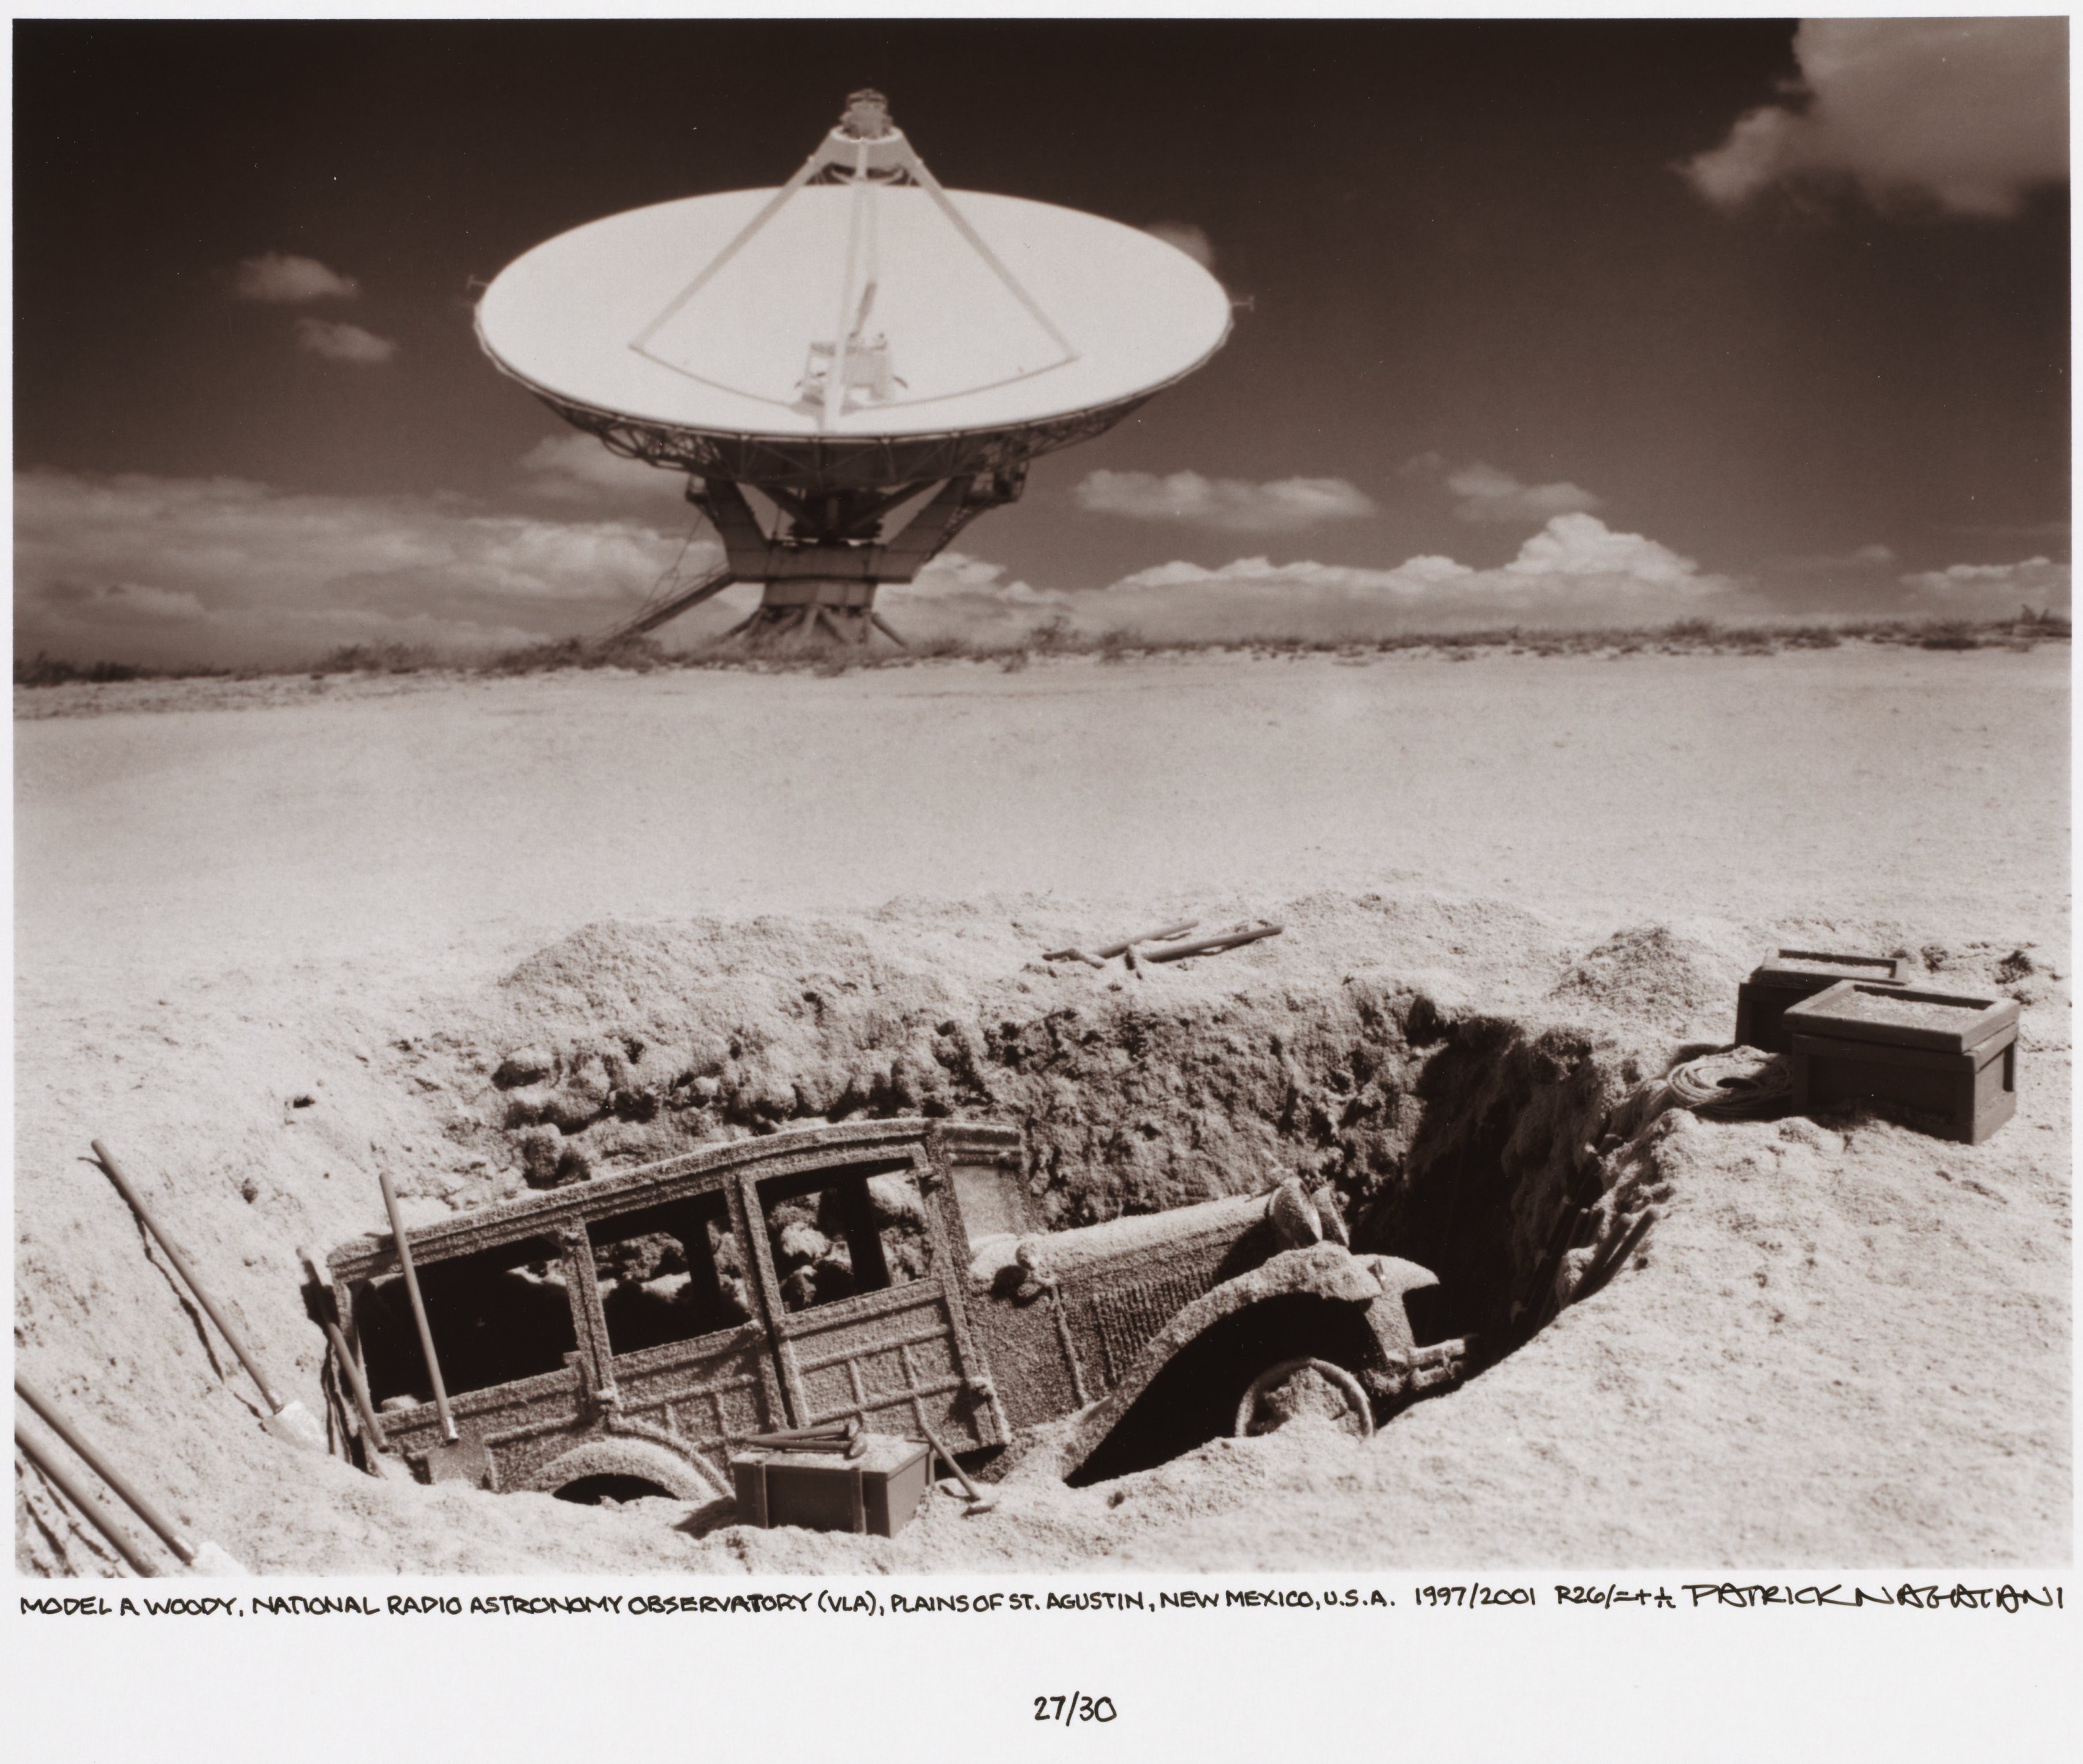 '31 Model A Woody, National Radio Astronomy Observatory (VLA), Plains of St. Agustin, New Mexico, U.S.A. (R26)
